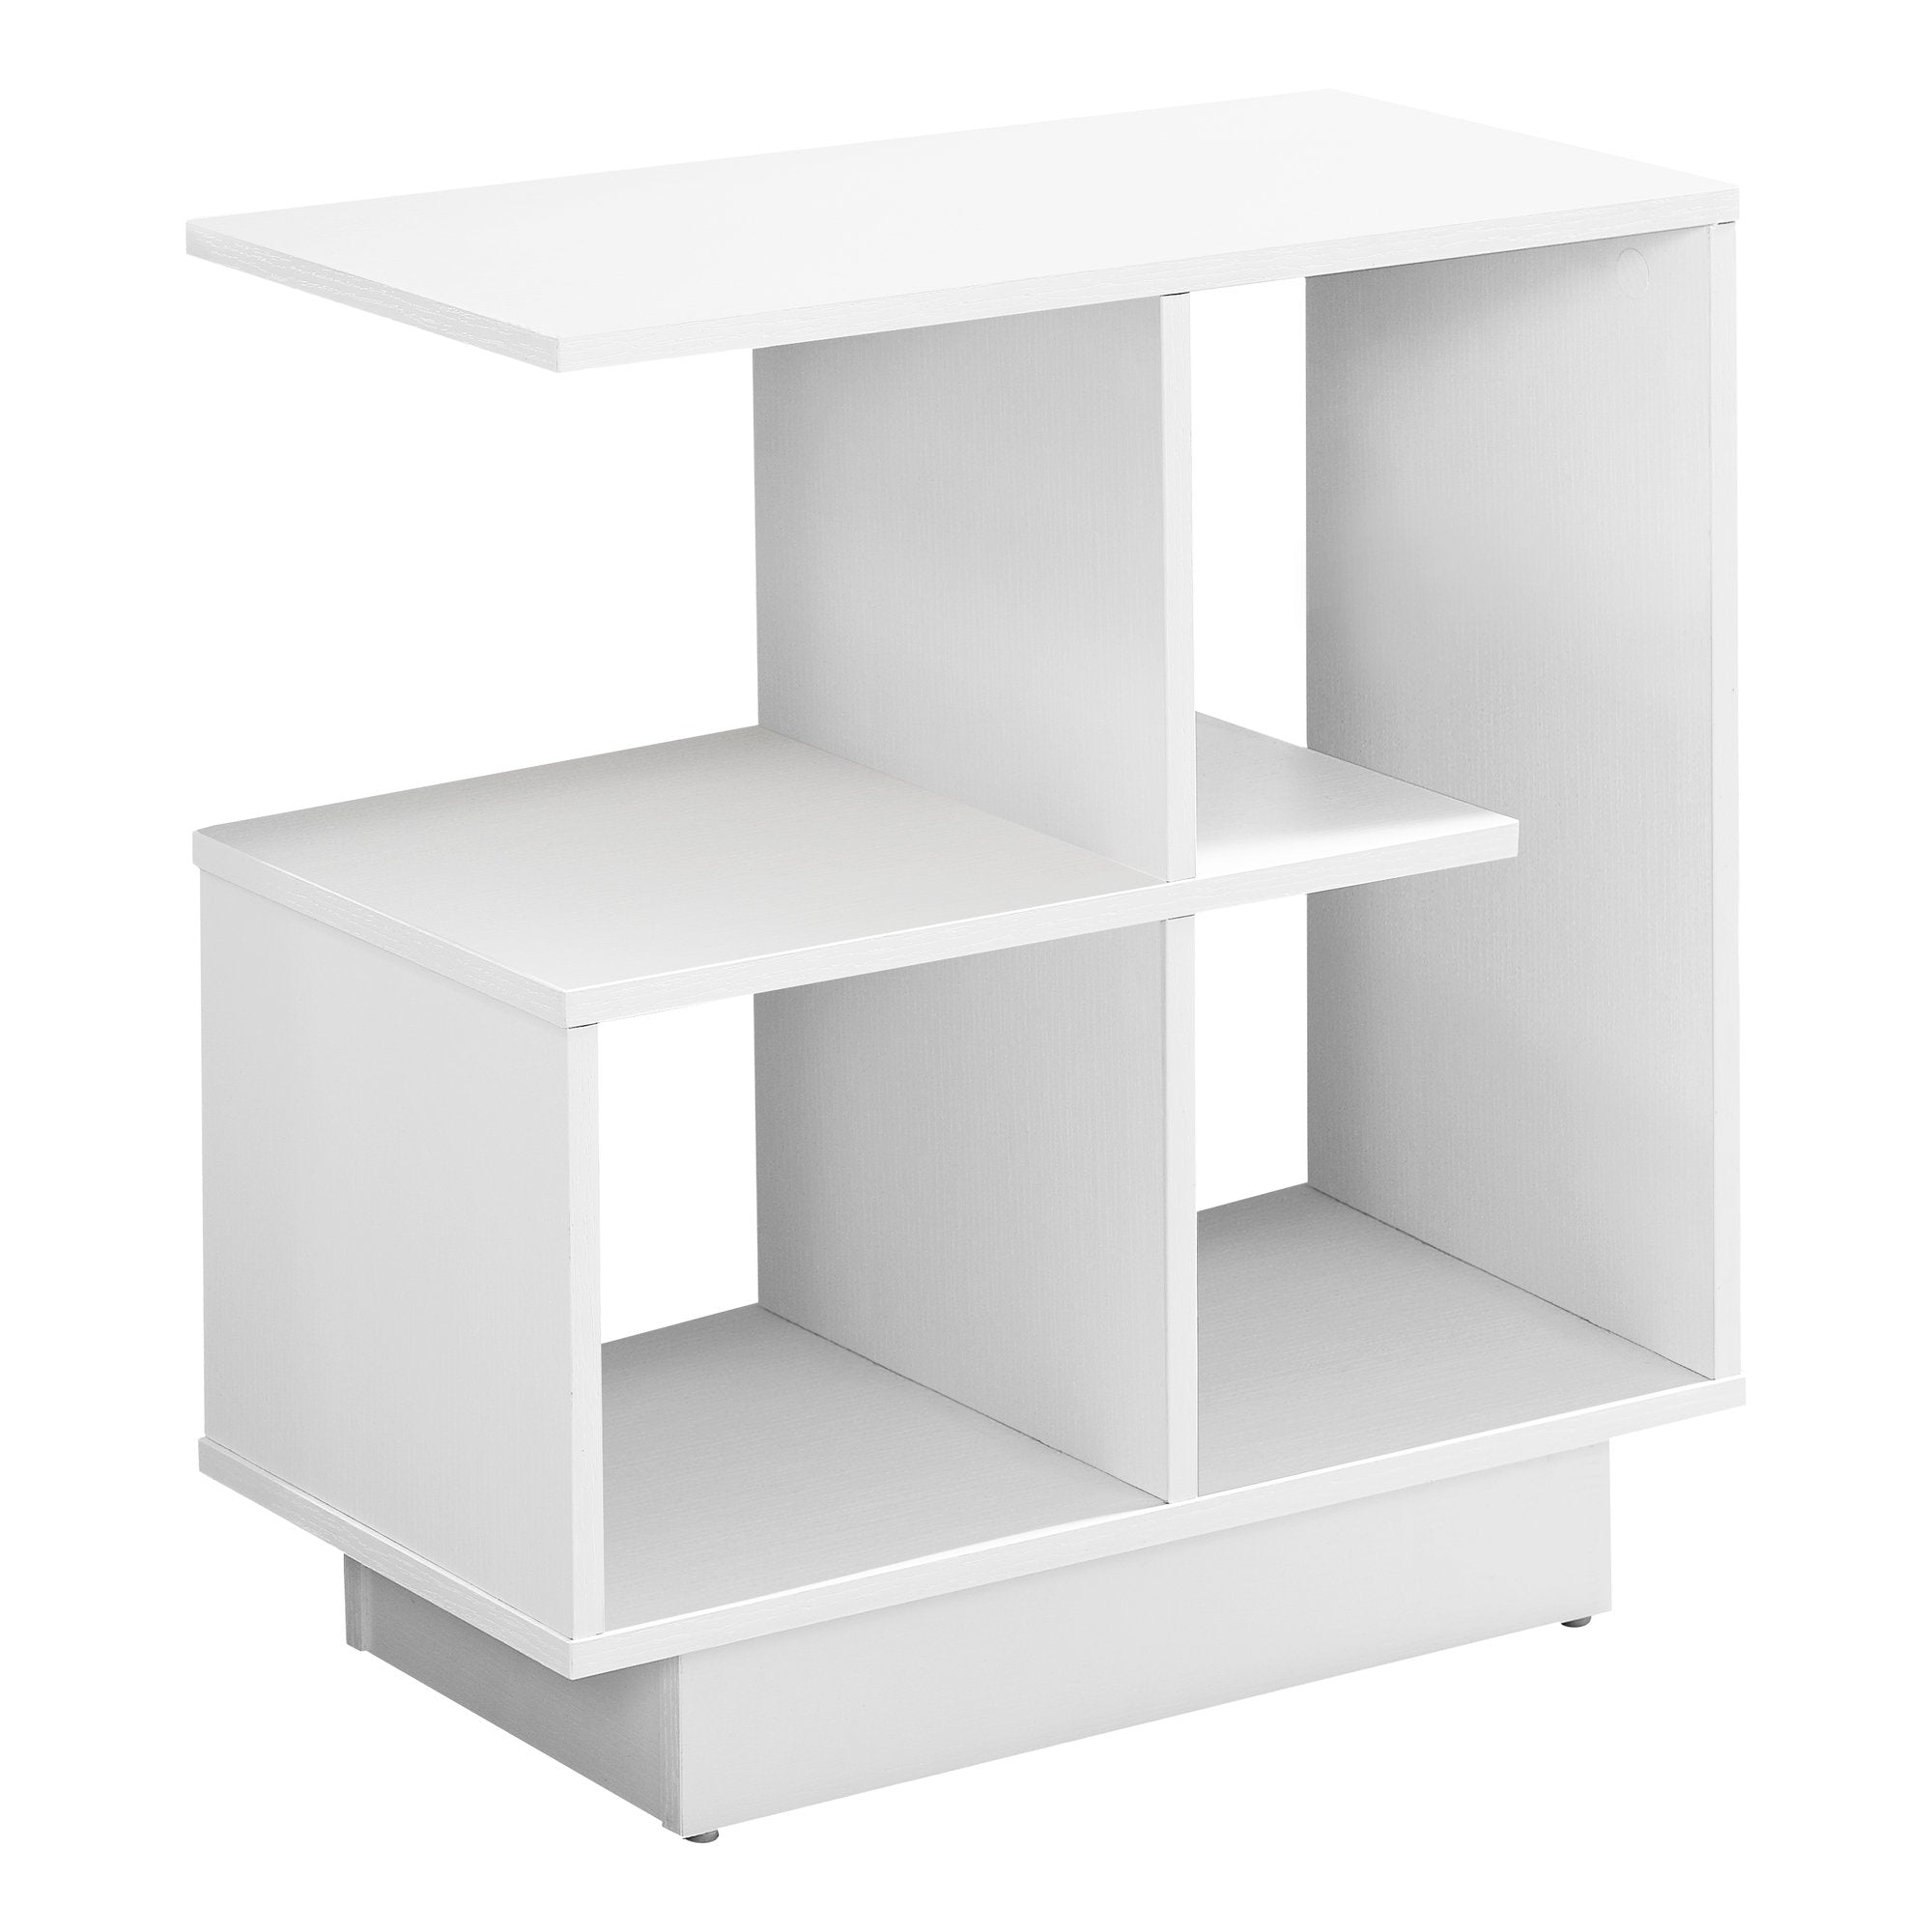 MN-952096    Accent Table, Side, End, Narrow, Small, Living Room, Bedroom, 3 Tier, Laminate, White, White, Contemporary, Modern